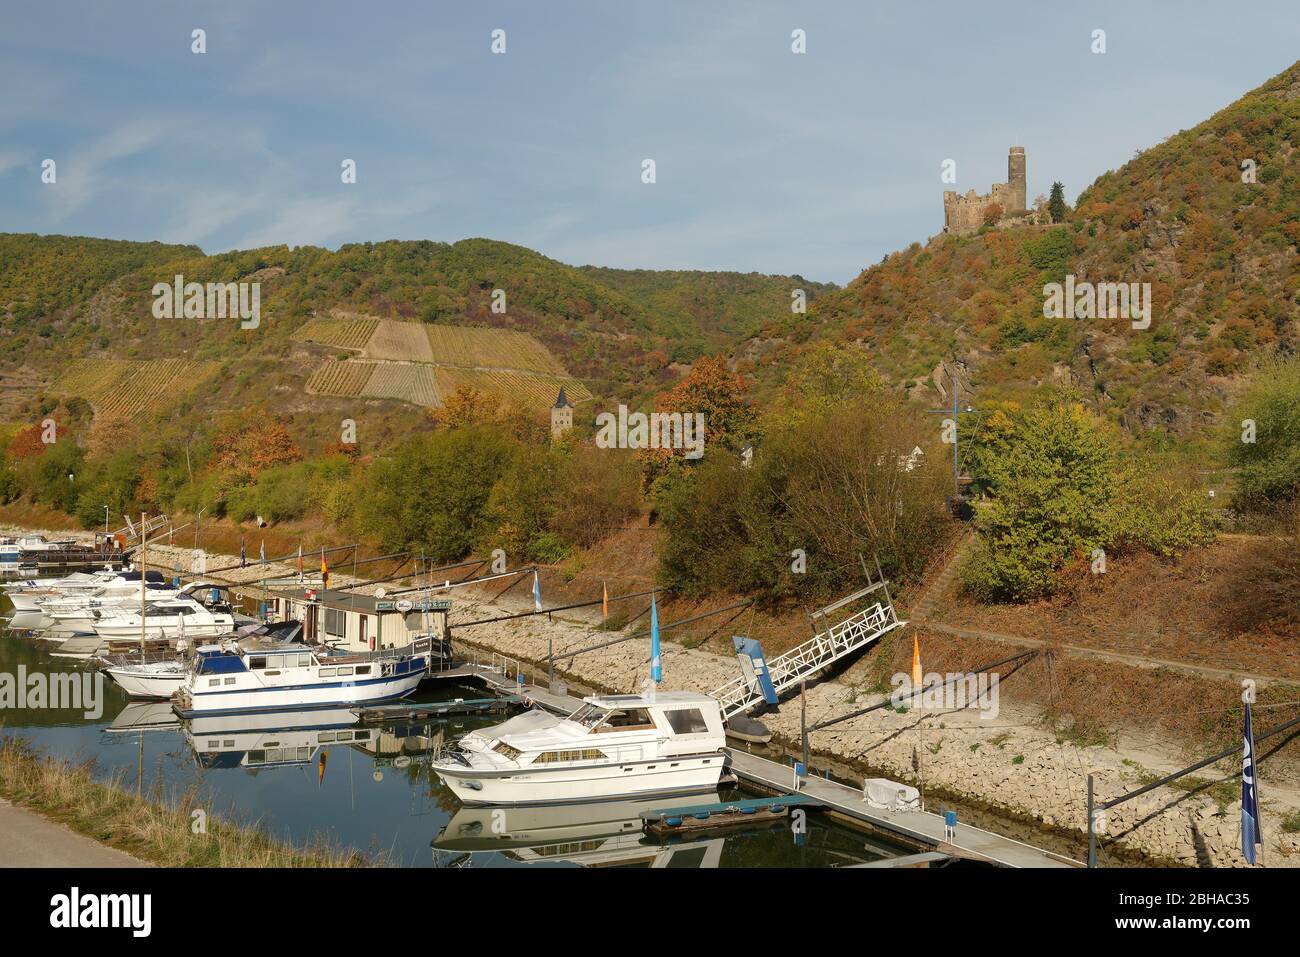 View from the Yacht Club St. Goar to the Maus Castle, St. Goar, UNESCO World Heritage Site Upper Middle Rhine Valley, Rhineland-Palatinate, Germany Stock Photo